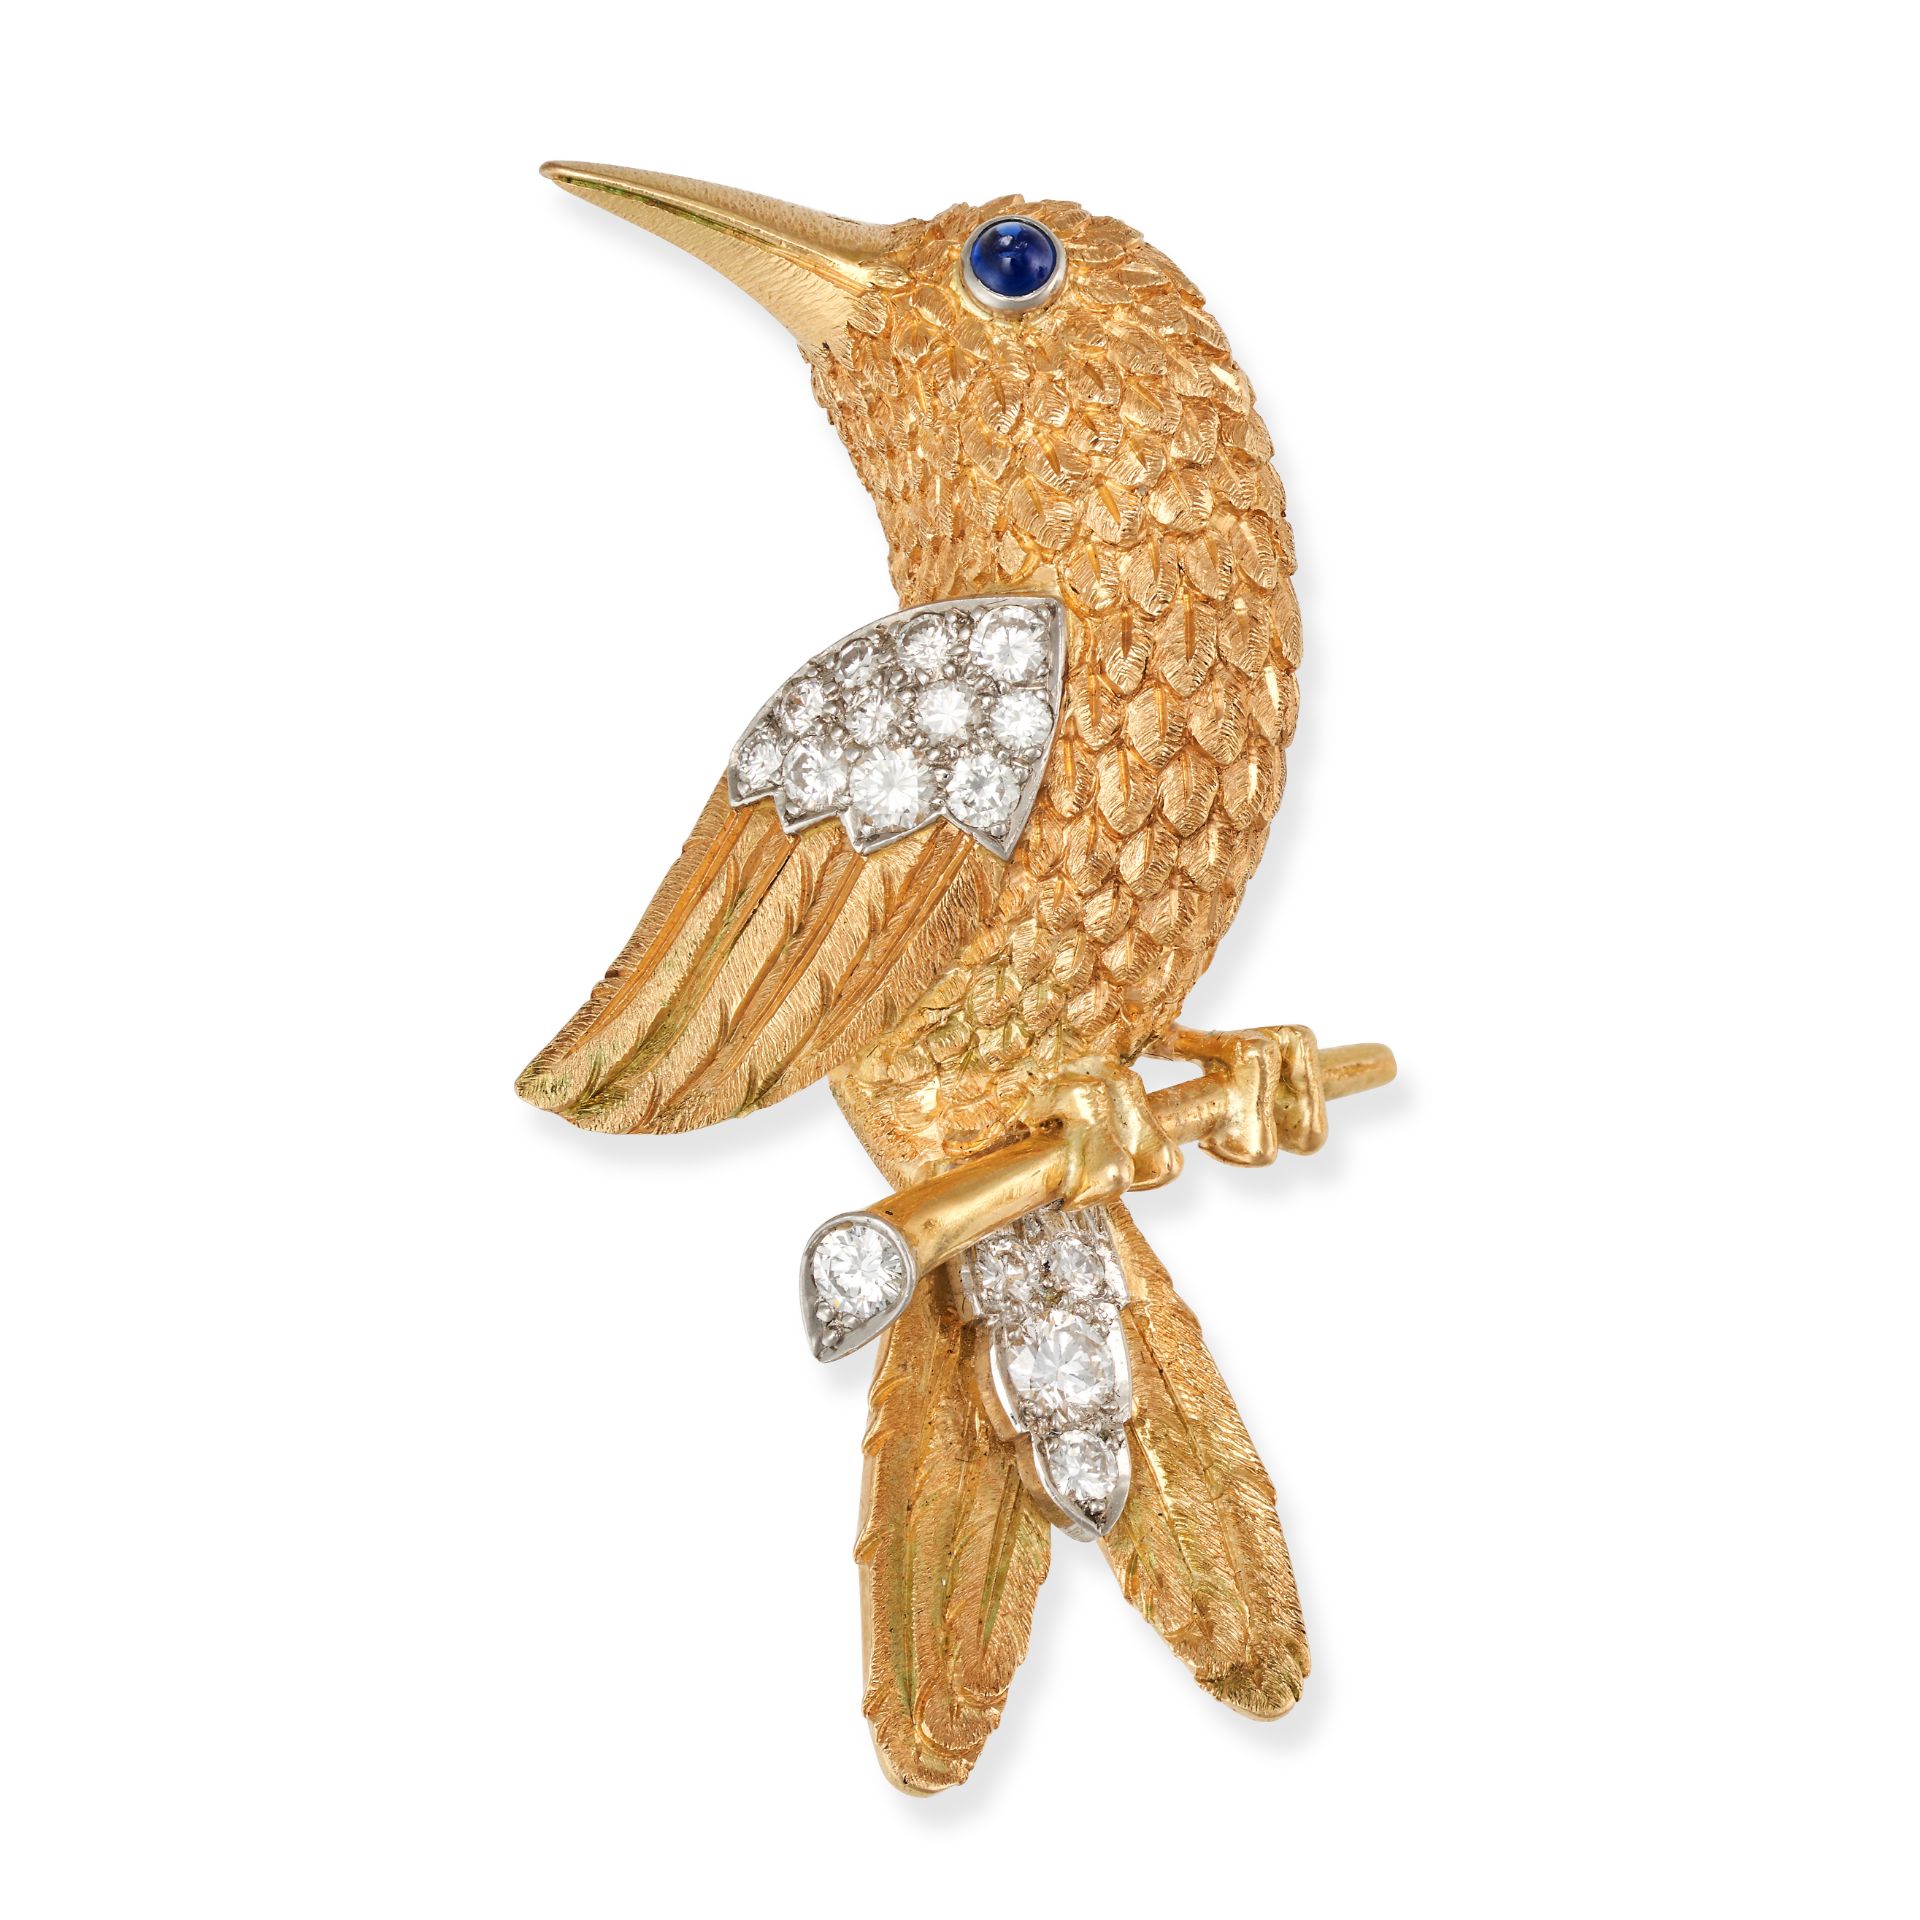 CARTIER, A SAPPHIRE AND DIAMOND BIRD BROOCH in 18ct yellow gold and platinum, designed as a bird ...